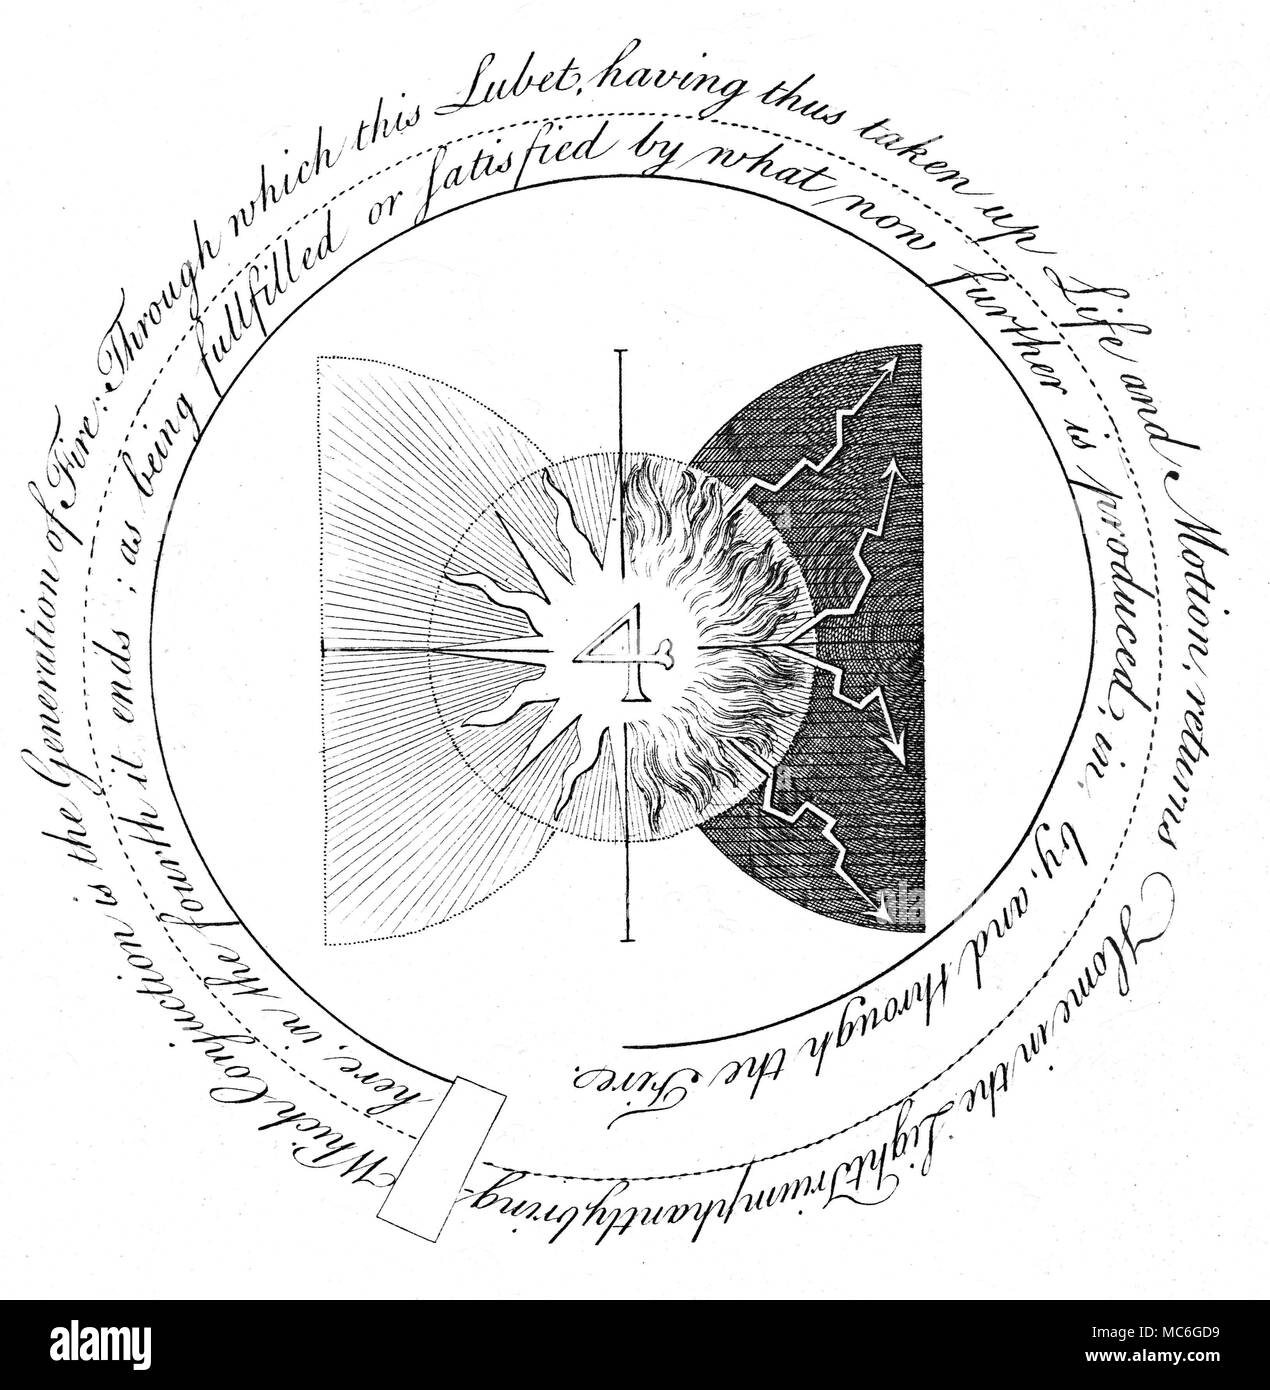 SYMBOLS - OCCULT ART - ROSICRUCIANS - SPIRALS One of a series of influential occult engravings by William Law, in explication of the principles in the arcane thought of the Rosicrucian, Jacob Boehme, from The Works of Jacob Behmen, The Teutonic Theosopher, Vol 1, 1764. Plate 3, which is a textual continuation, in spiral form, of the previous plate, and which exhibits the development of the Fourth Principle, in what Boehme calls 'The Fire World'. This Fourth Principle, or Property, is illustrated as being a result of the meeting of light, and the light Fire, with darkness, and the dark Fire, b Stock Photo